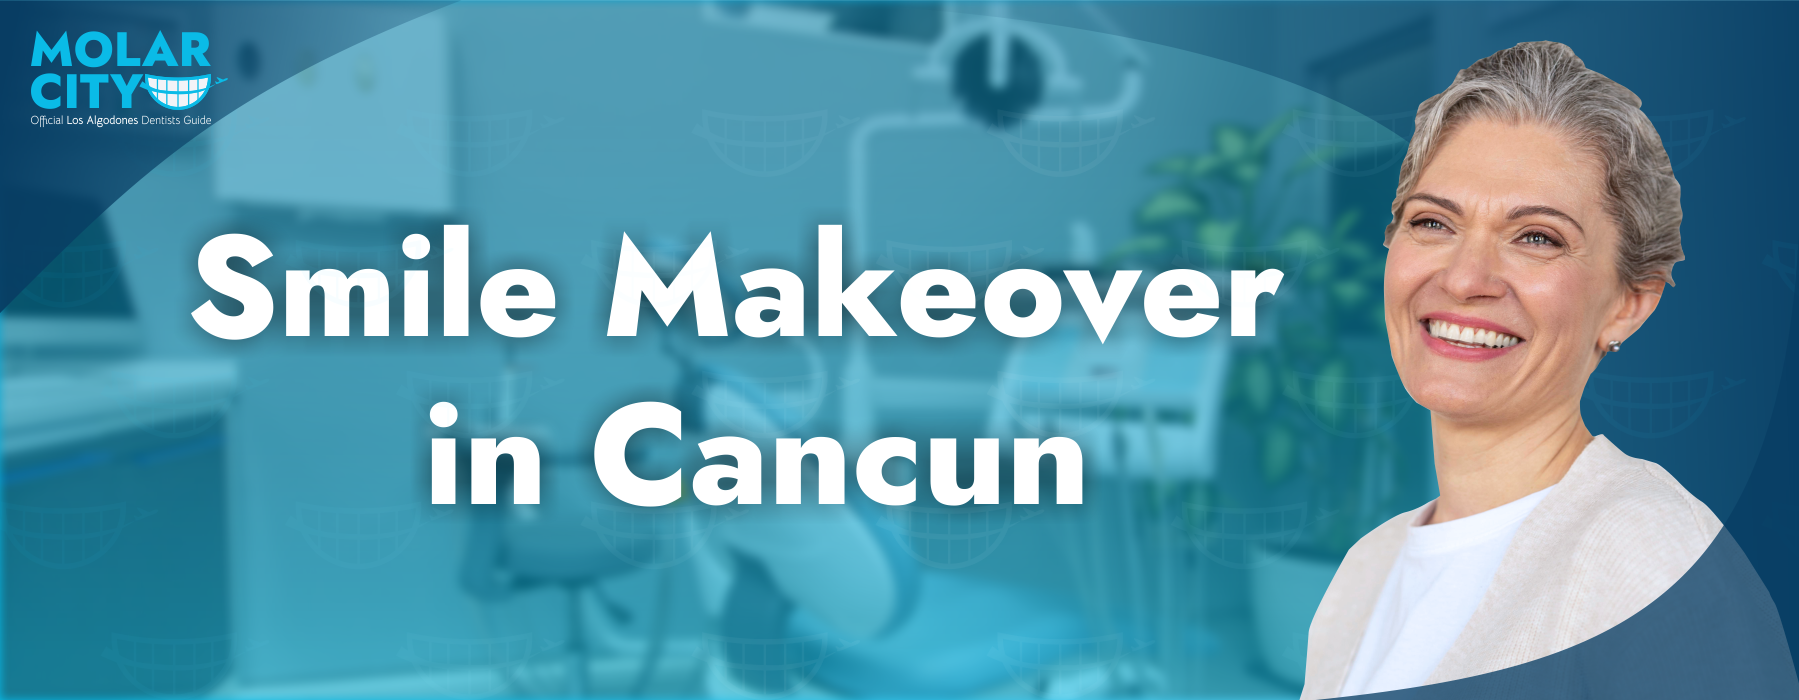 Transform Your Smile with a Makeover in Cancun